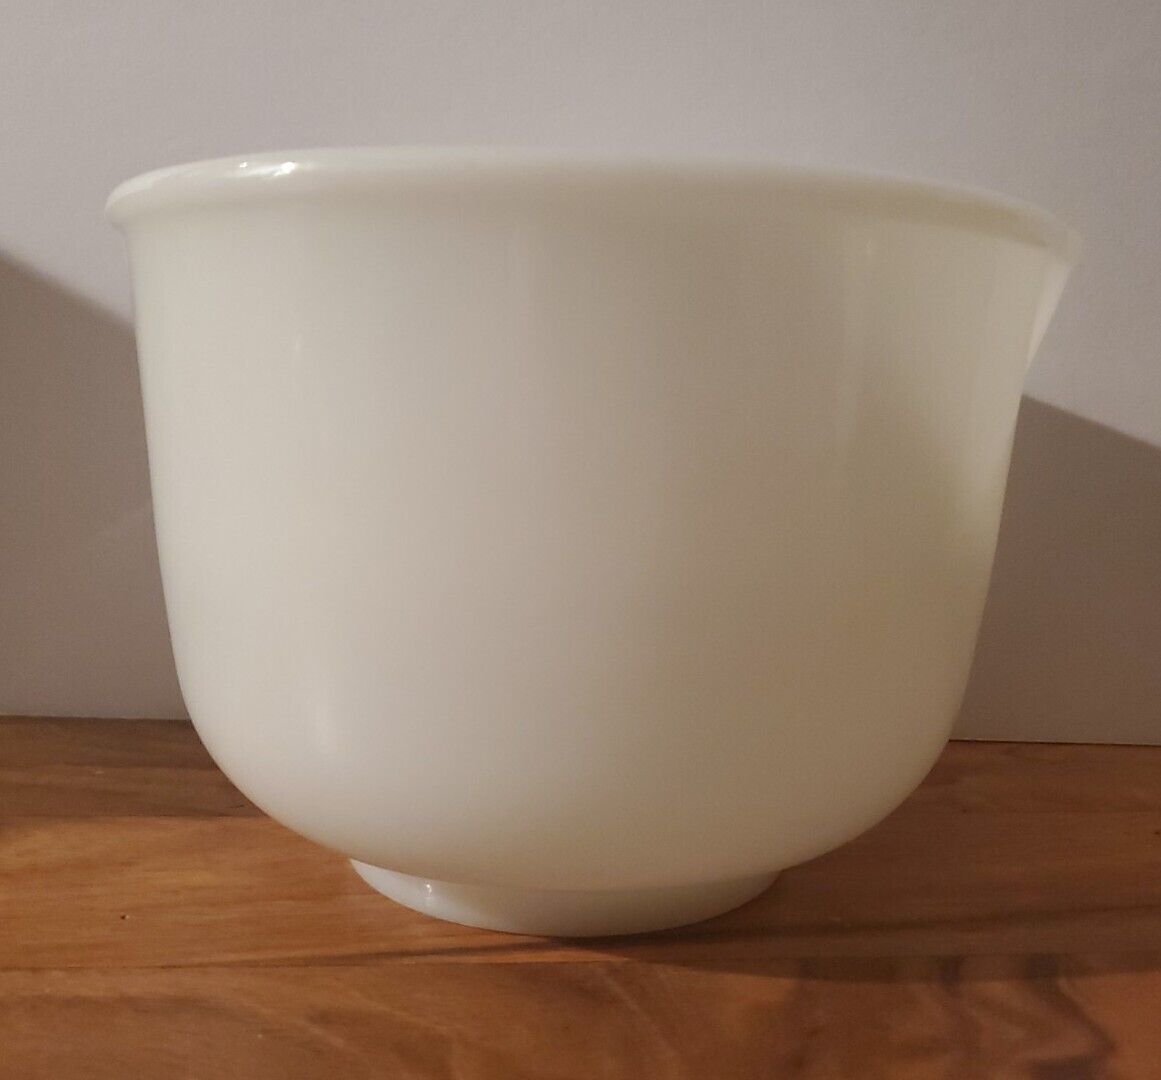 Primary image for FIRE KING For Sunbeam 6 1/2" Mixing Bowl White W Pour Spout Milk Glass #10